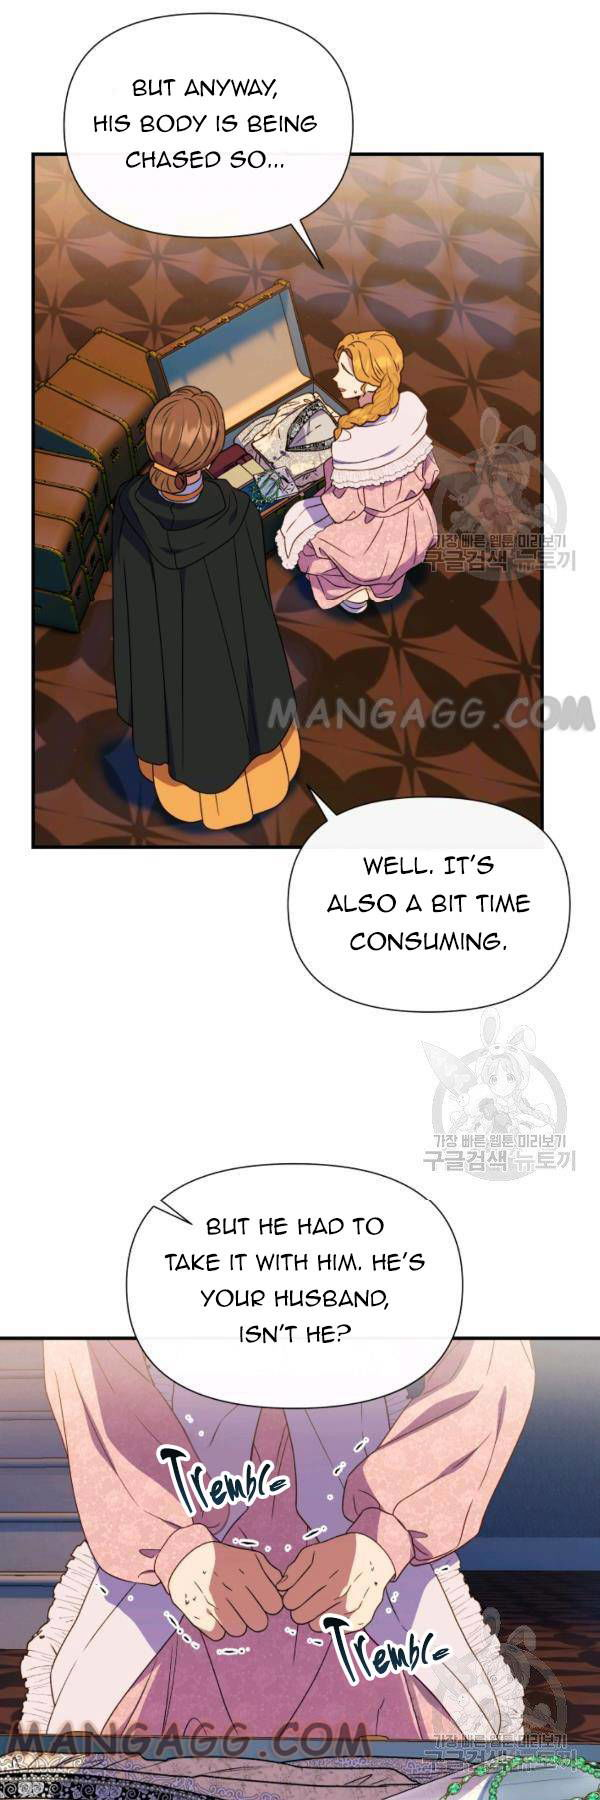 The Monster Duchess and Contract Princess Chapter 111 page 7